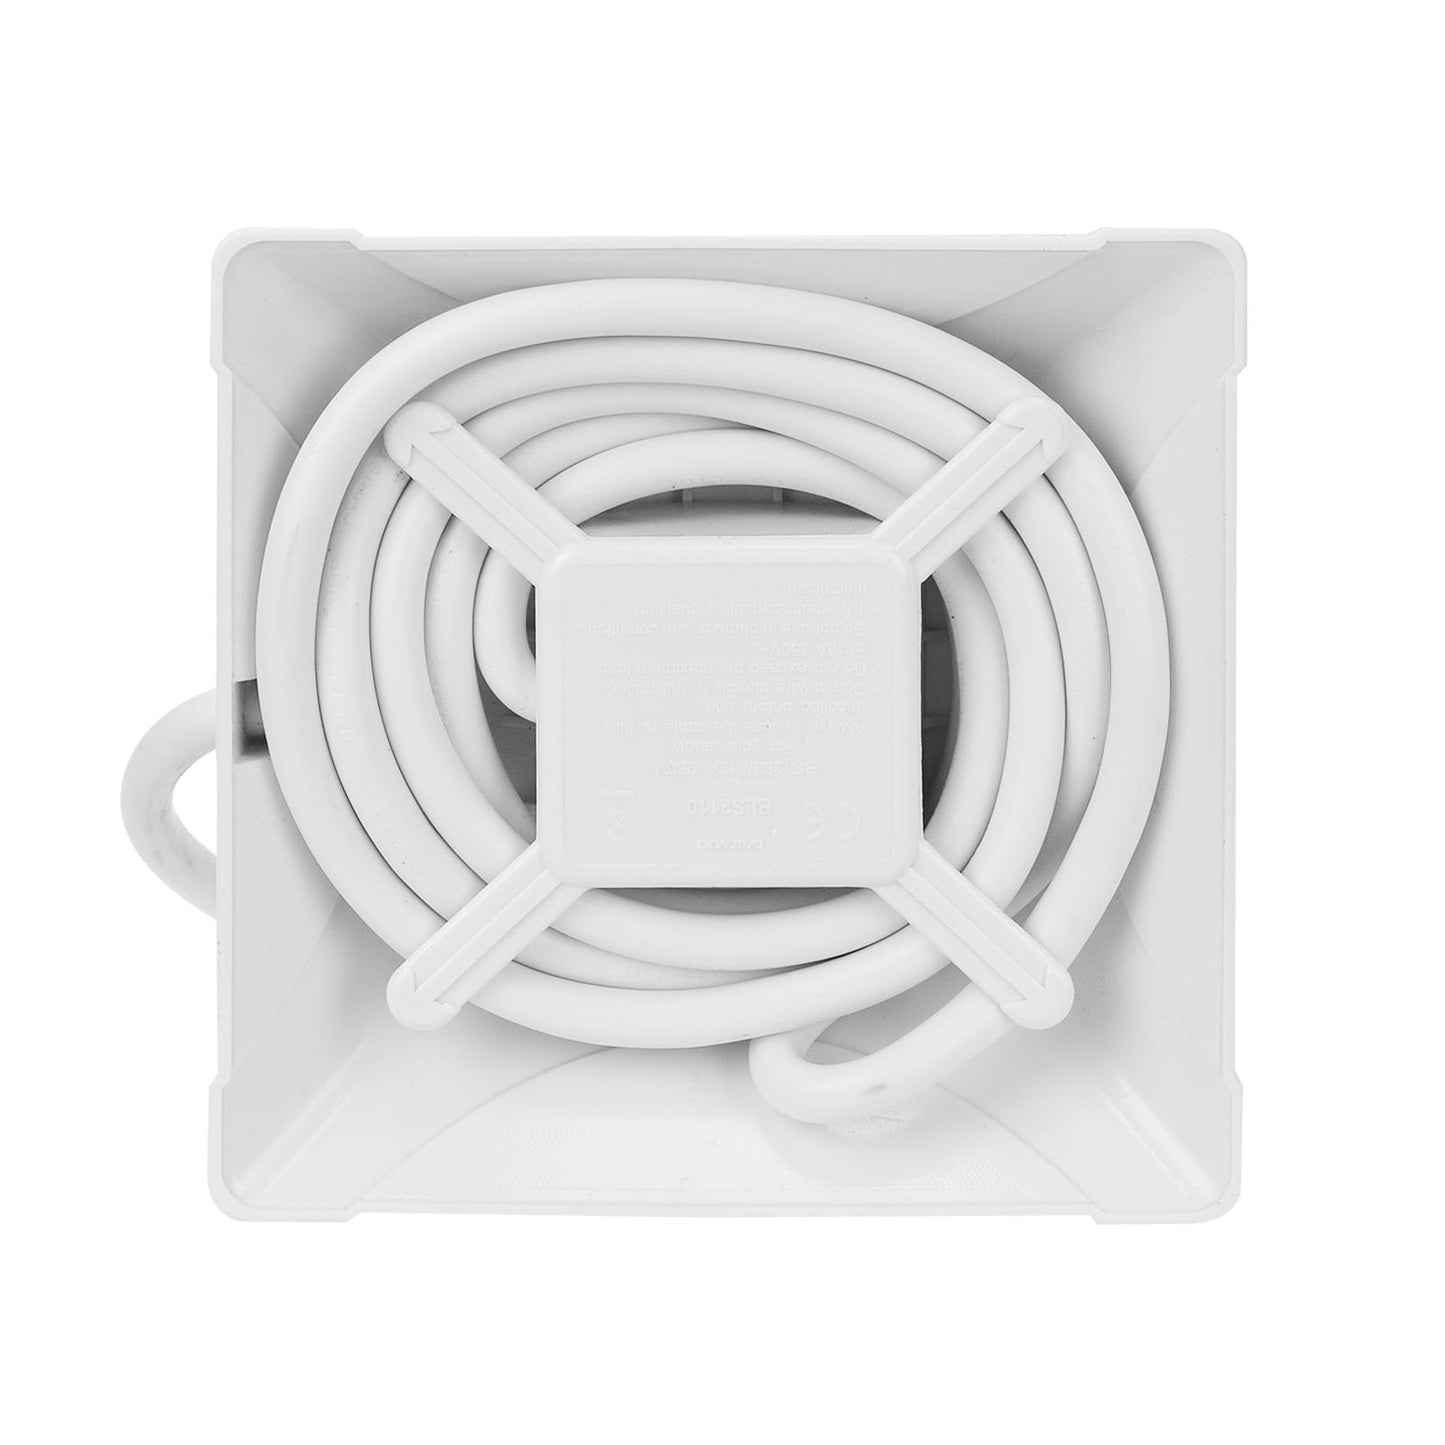 Extend Your Reach with Electrical Extension Plugs and Leads